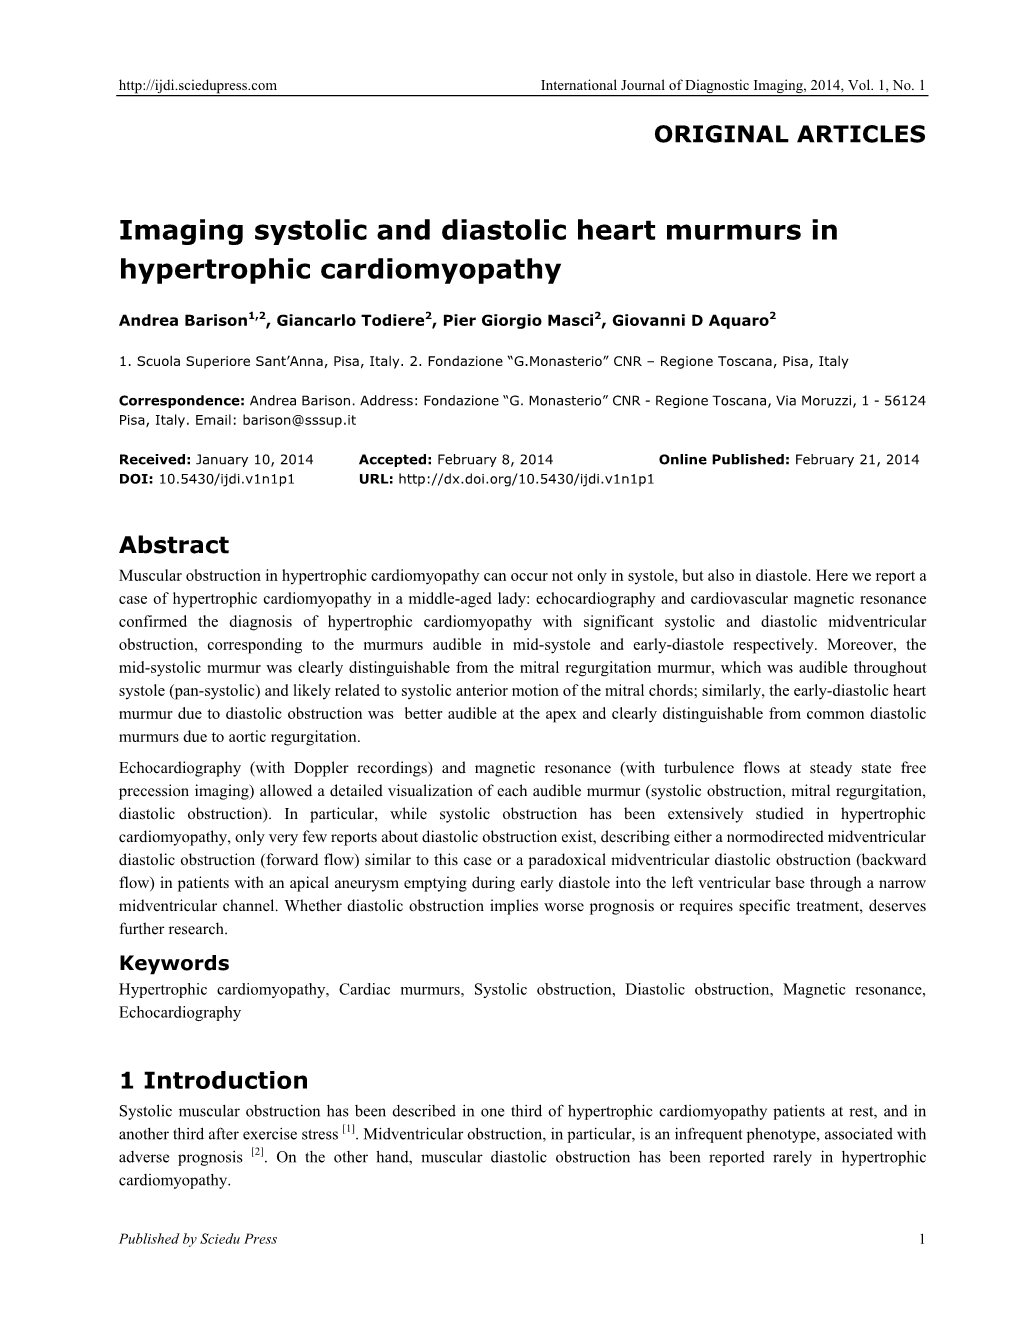 Imaging Systolic and Diastolic Heart Murmurs in Hypertrophic Cardiomyopathy